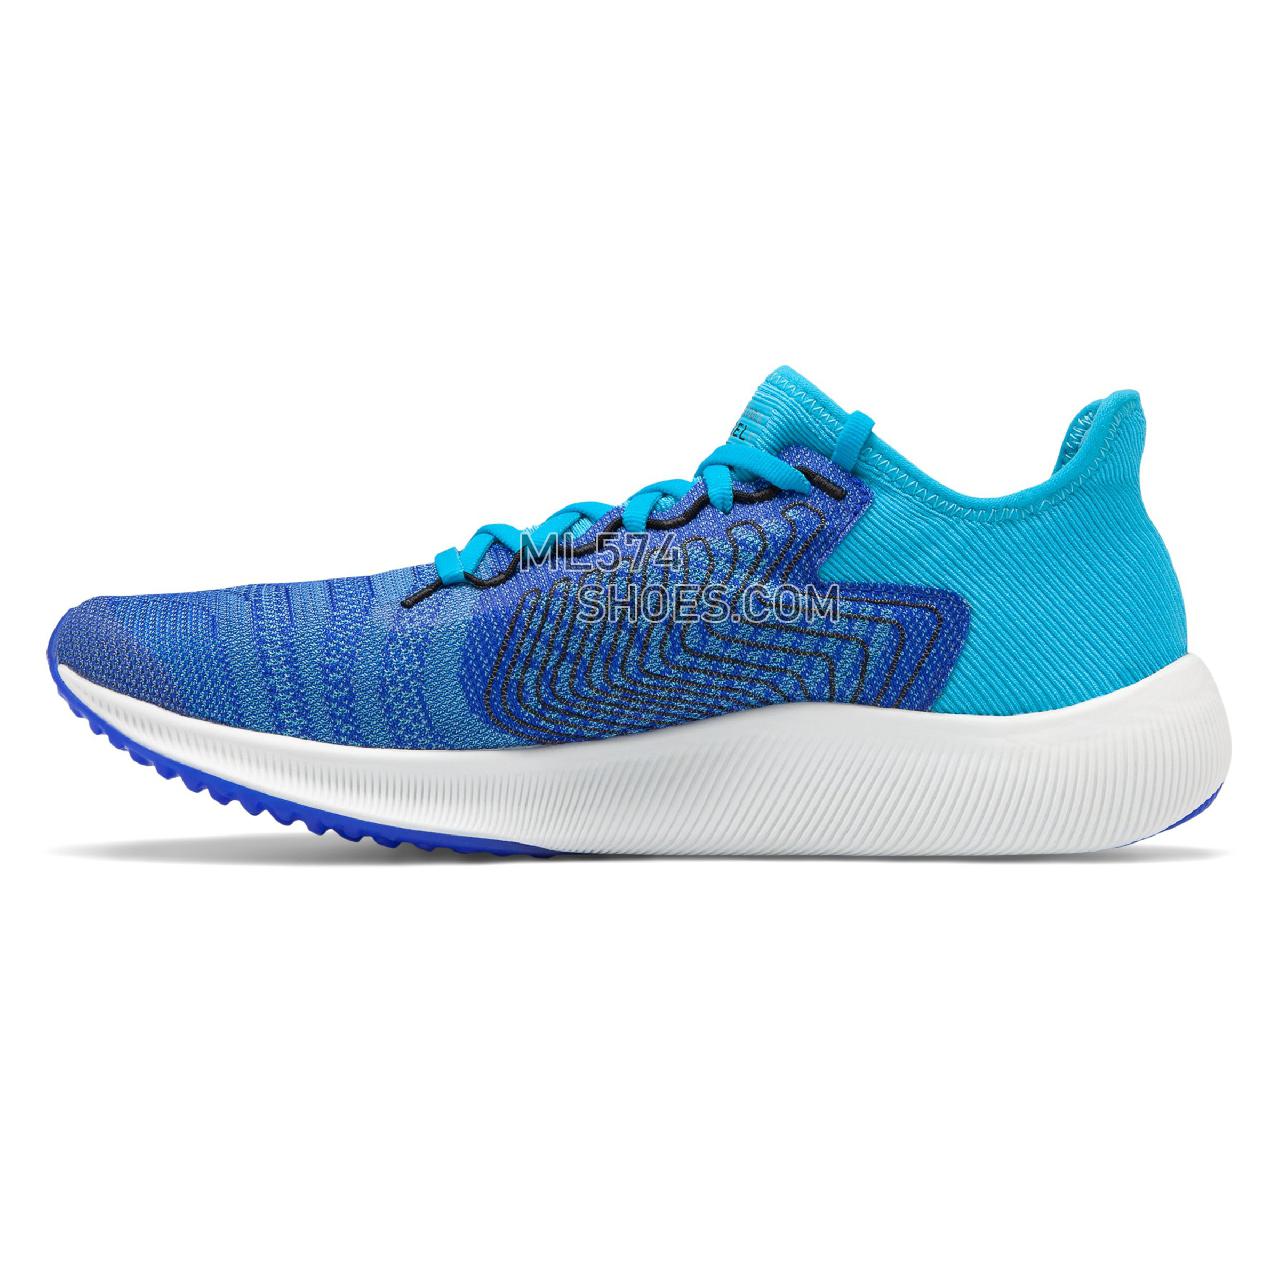 New Balance FuelCell Rebel - Men's Neutral Running - UV Blue with Bayside - MFCXBB